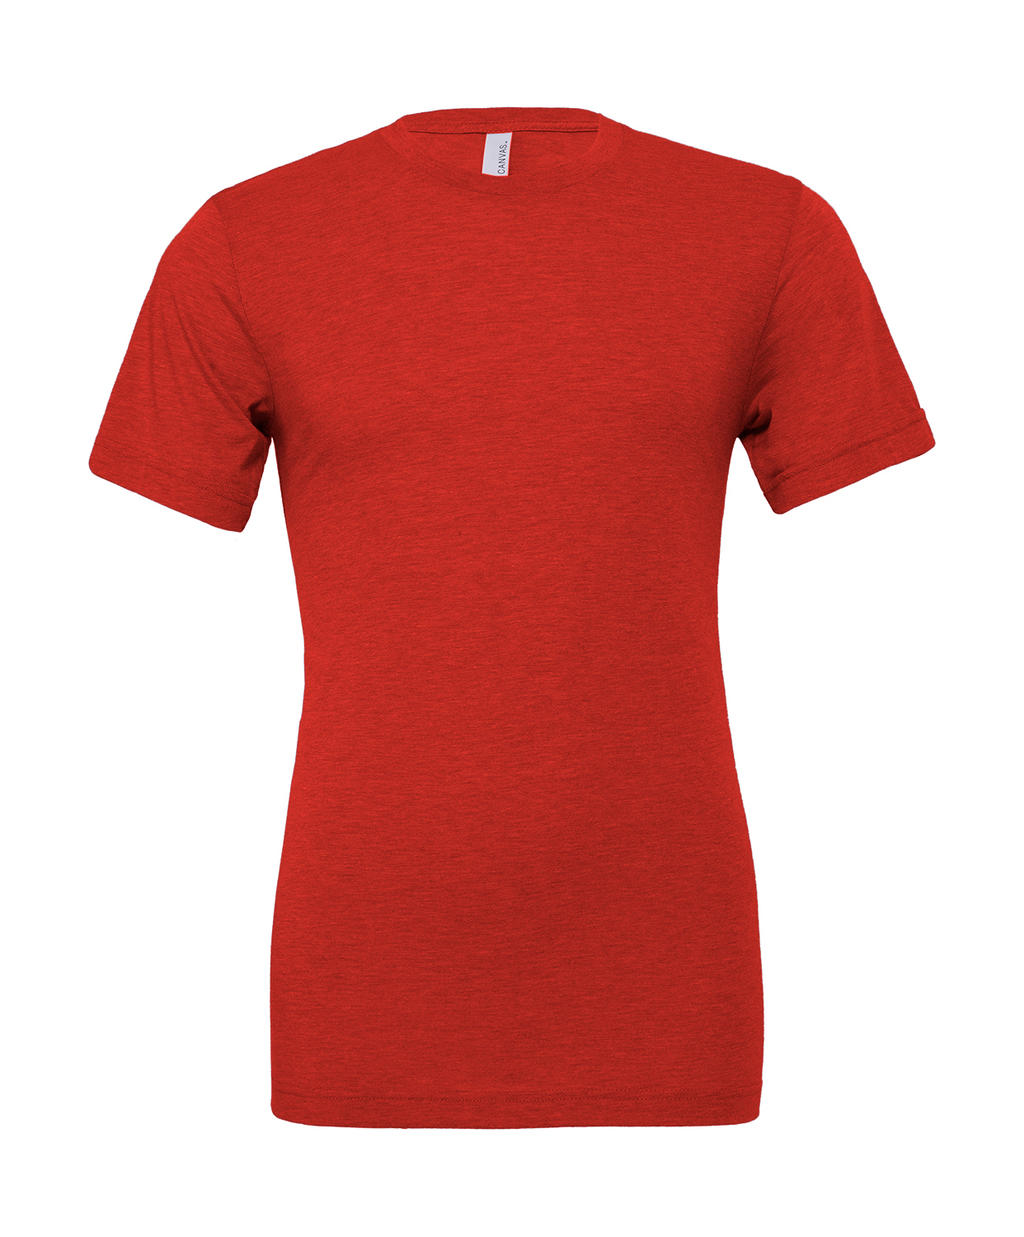  Unisex Triblend Short Sleeve Tee in Farbe Brick Triblend